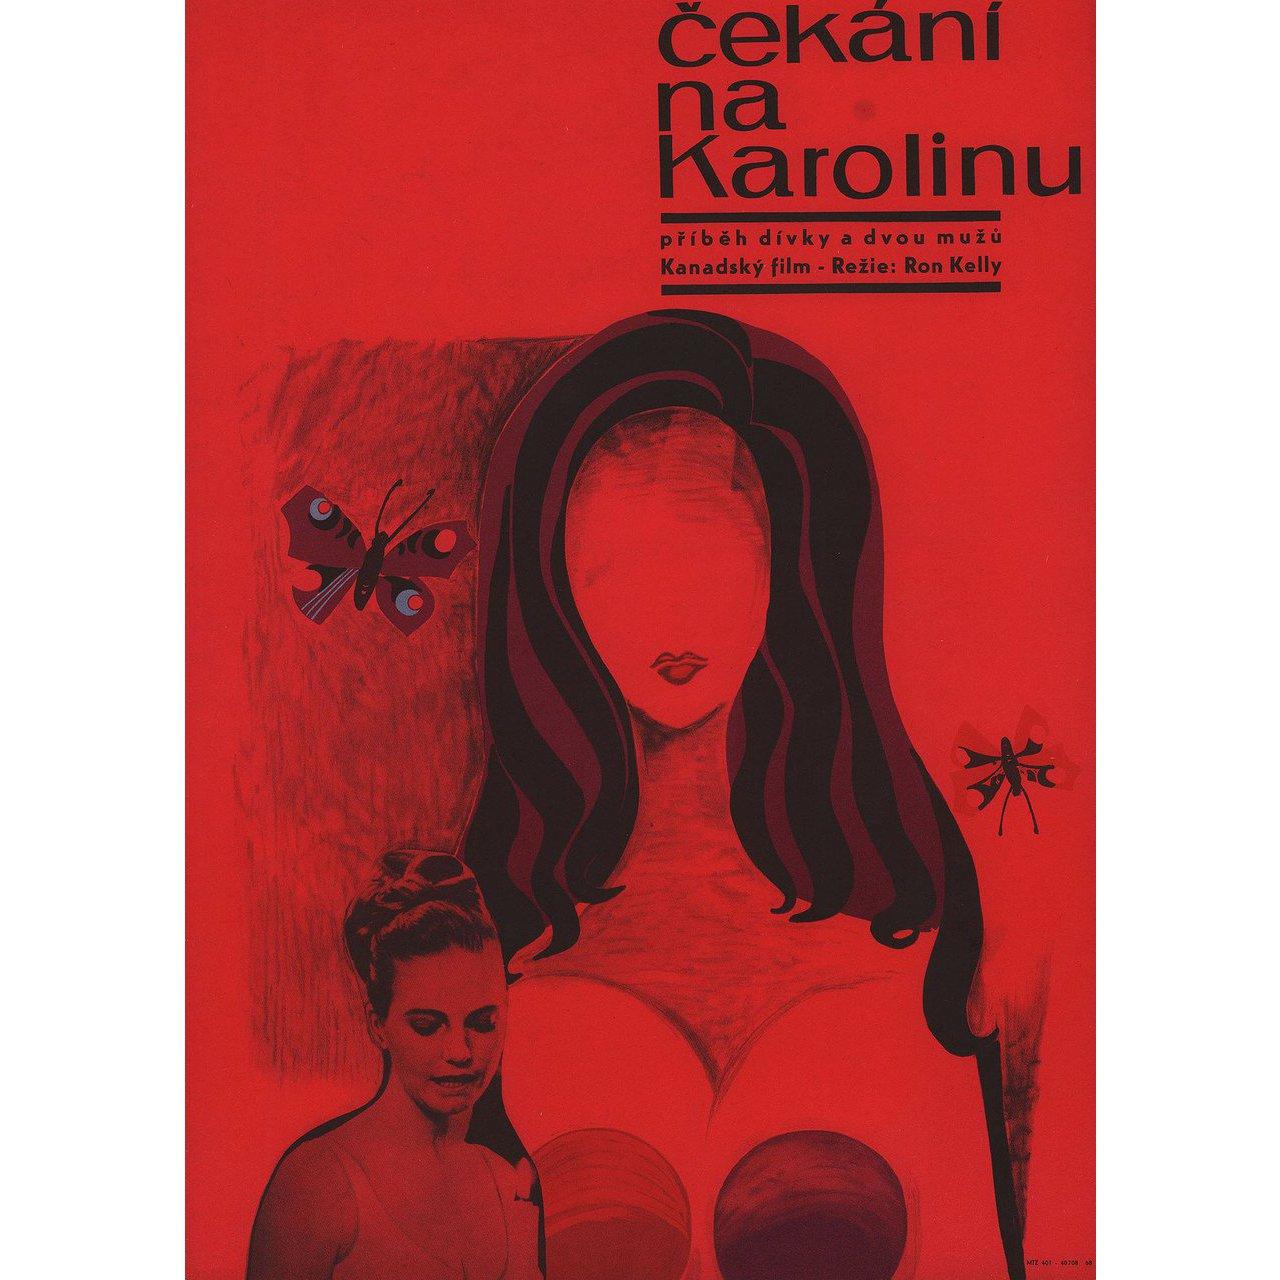 Original 1969 Czech A3 poster by Olga Starkova for the film Waiting for Caroline directed by Ron Kelly with Alexandra Stewart / Francois Tasse / William Needles / Aileen Seaton. Very good-fine condition, rolled. Please note: the size is stated in